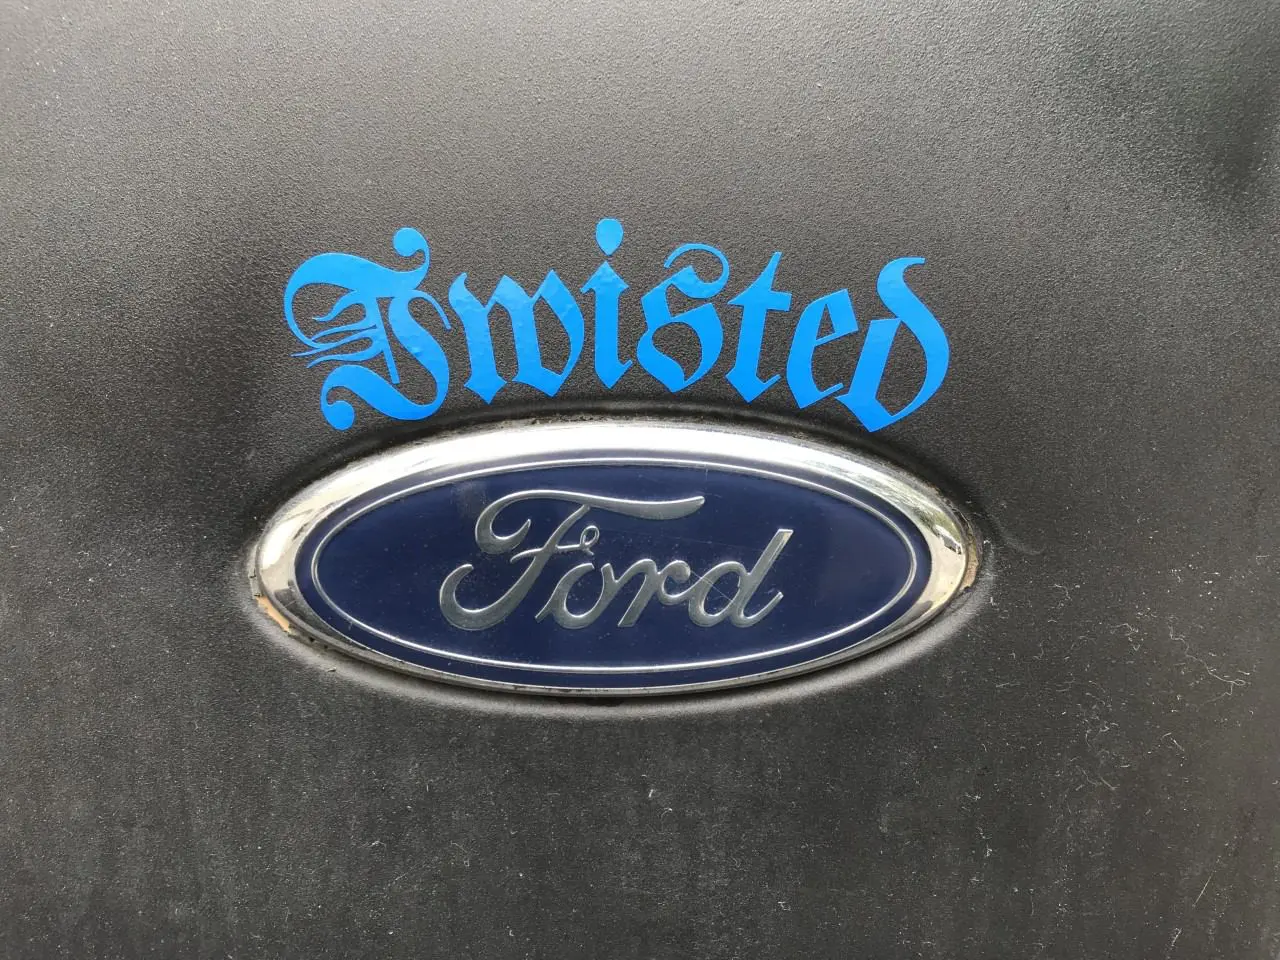 A blue and silver ford logo on the side of a car.